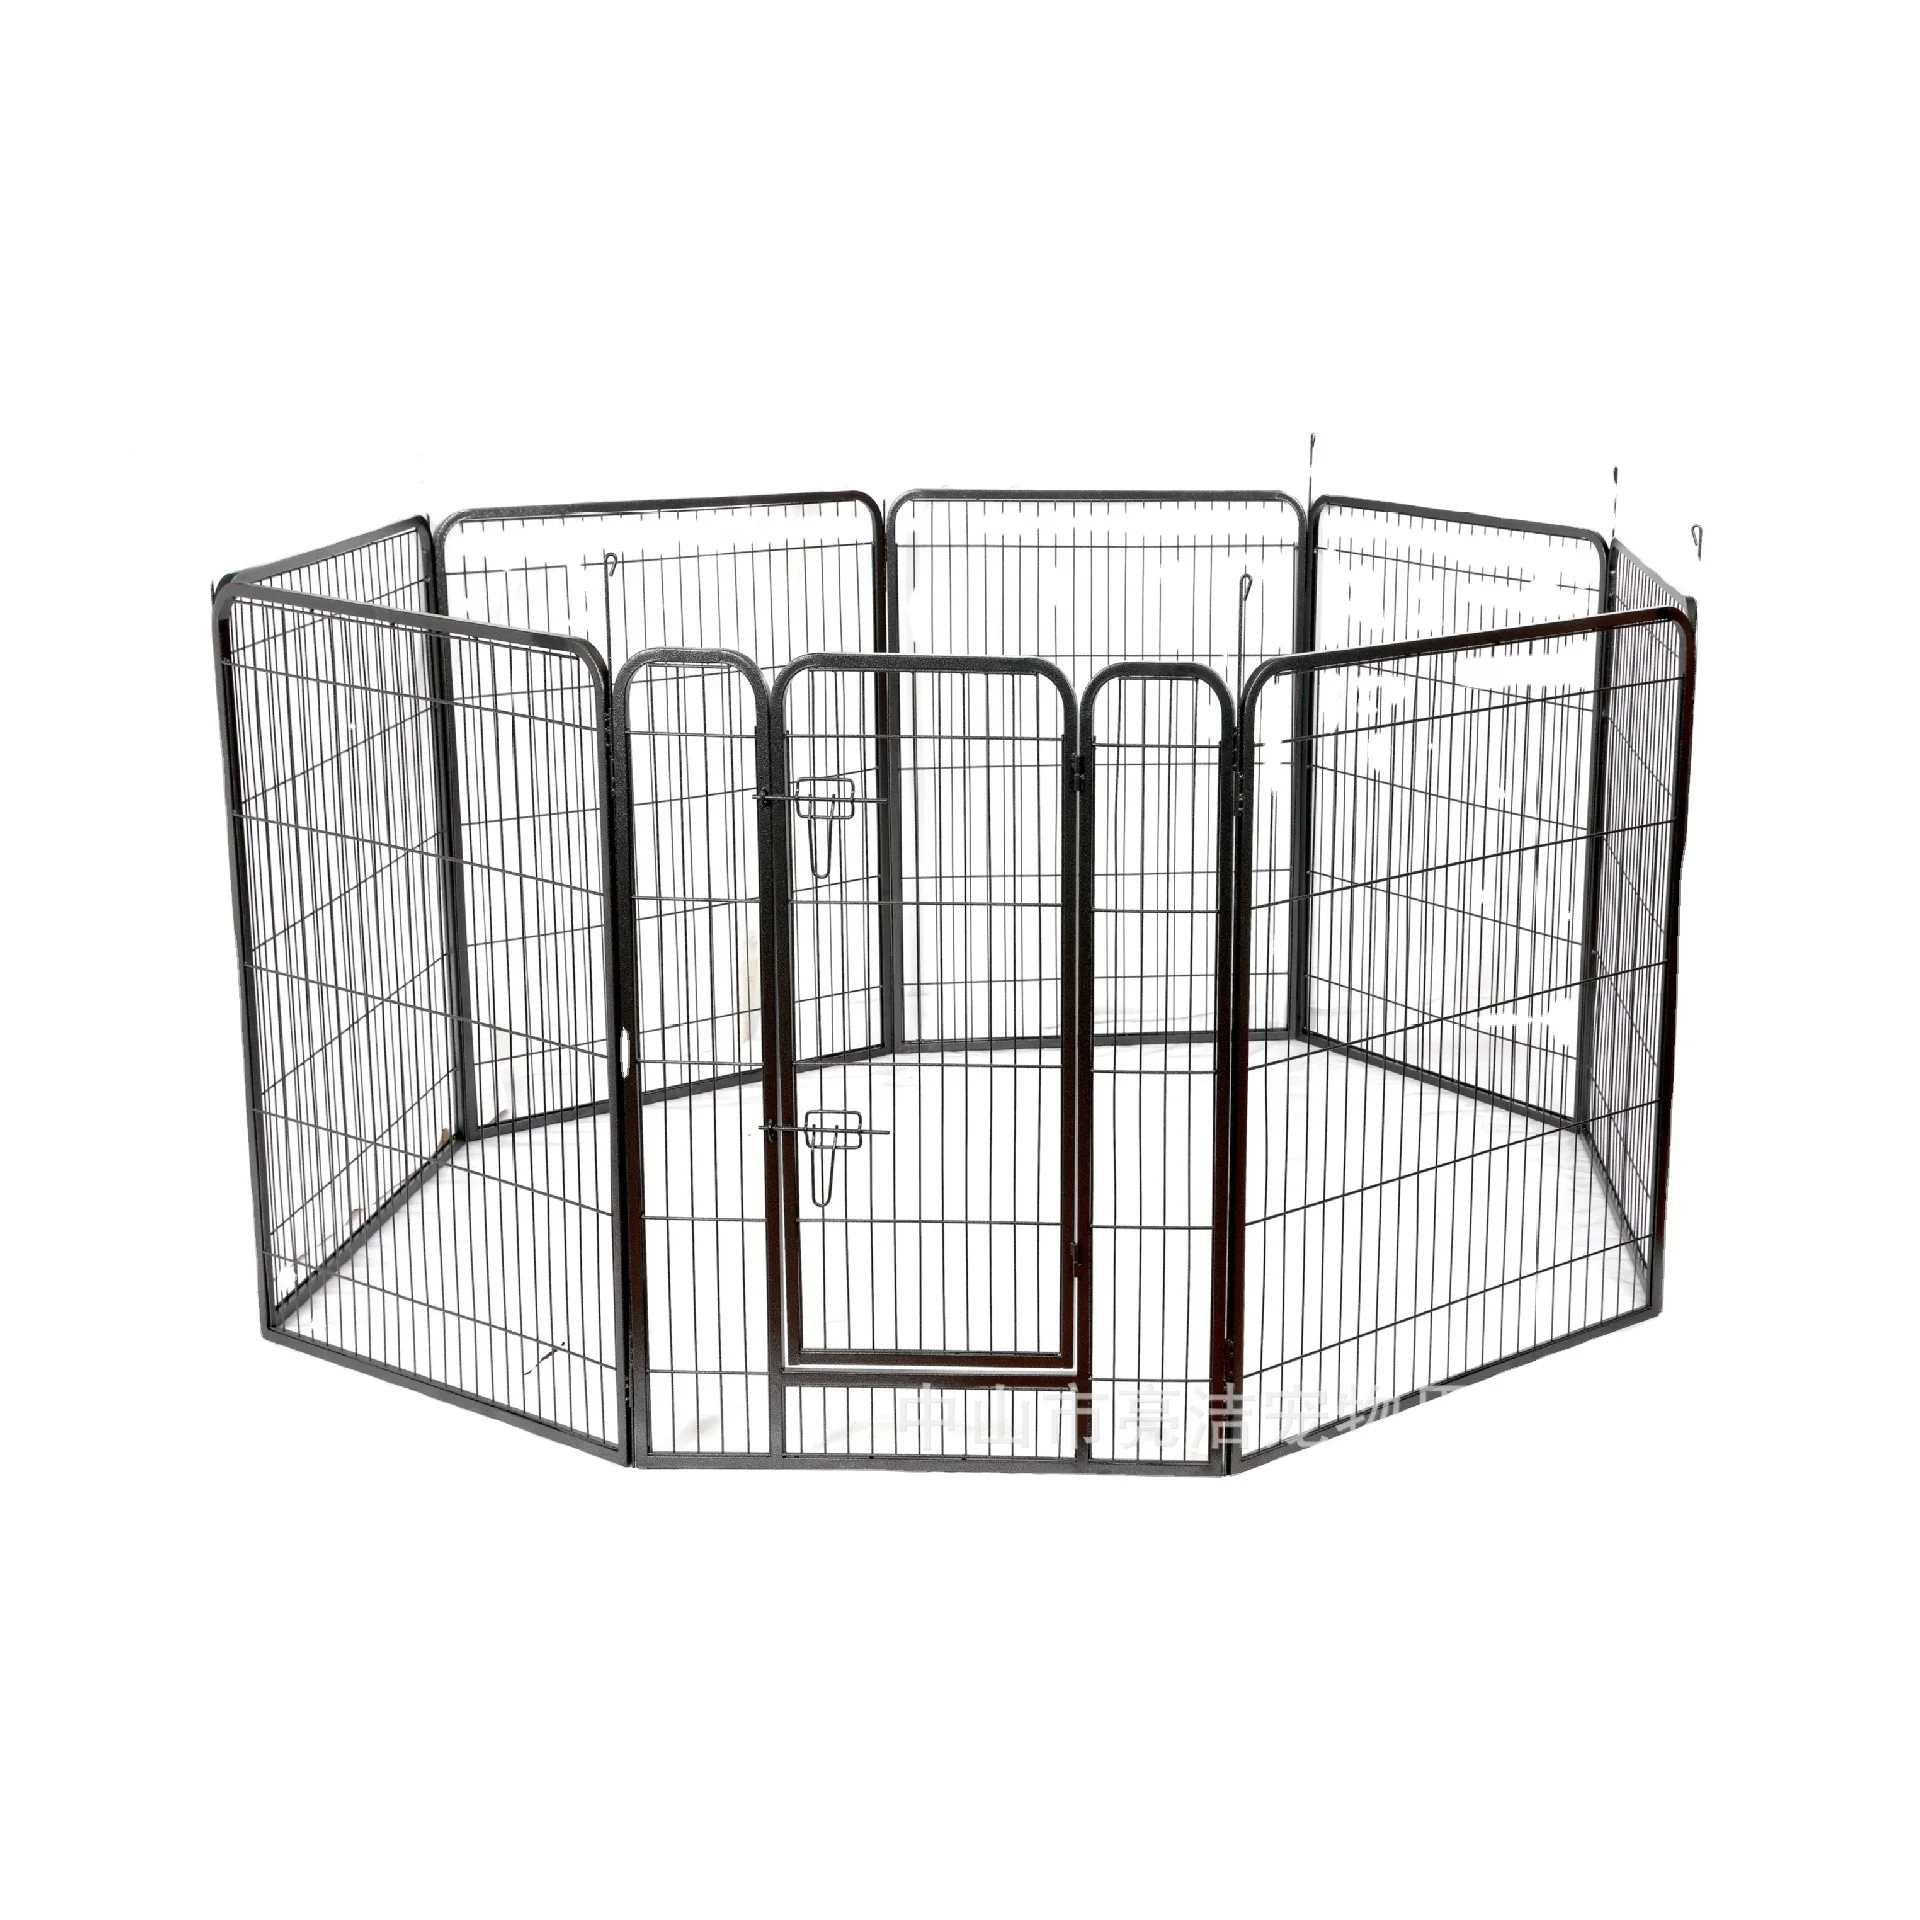 

Lorenzo OEM Recinto Per Cani H100xW80 Sangkar Dog Crates Stackable Extra Large Outdoor Doghouse Cage 8 Panels Playpen Dog Fence, Black